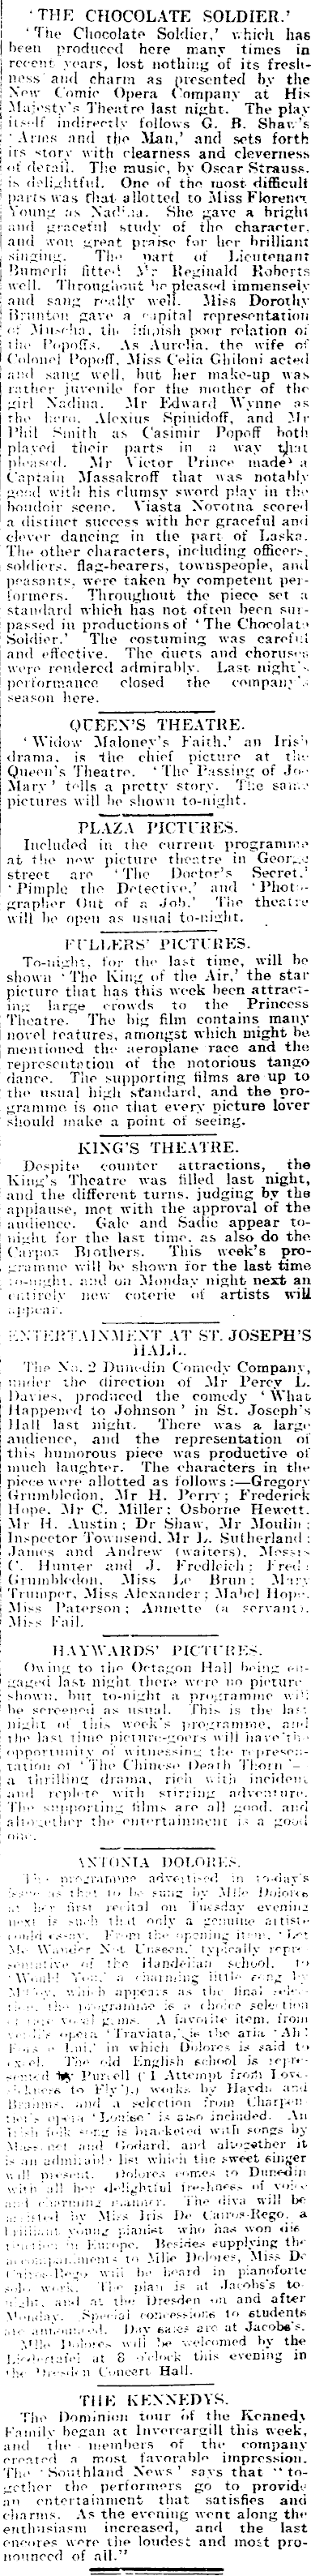 Papers Past Newspapers Evening Star 28 February 1914 Amusements